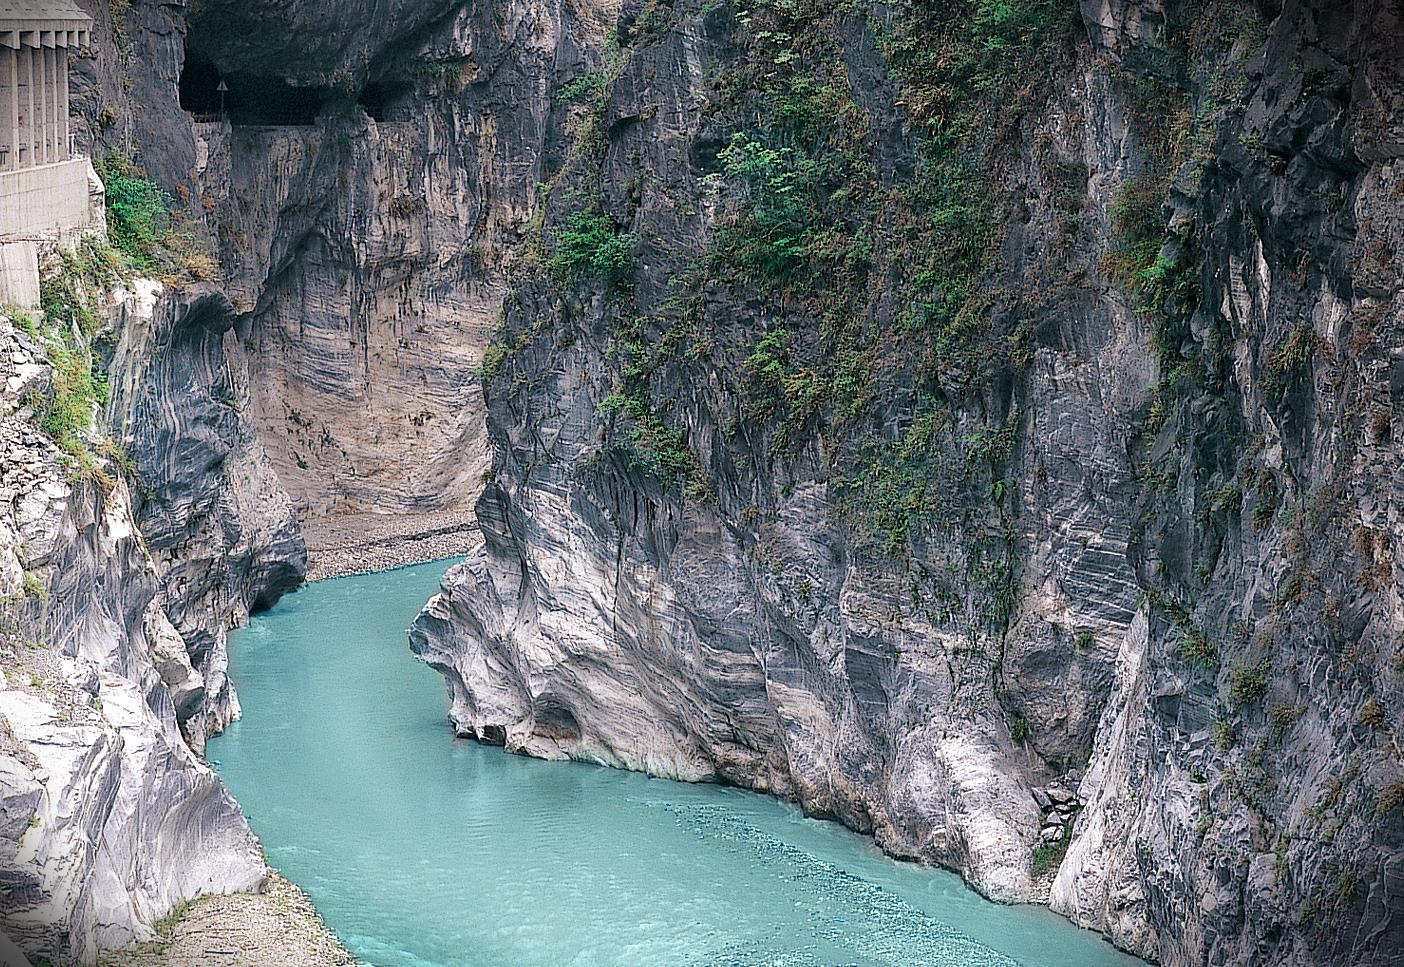 World's Top 10 must-see sights - Taroko Gorge